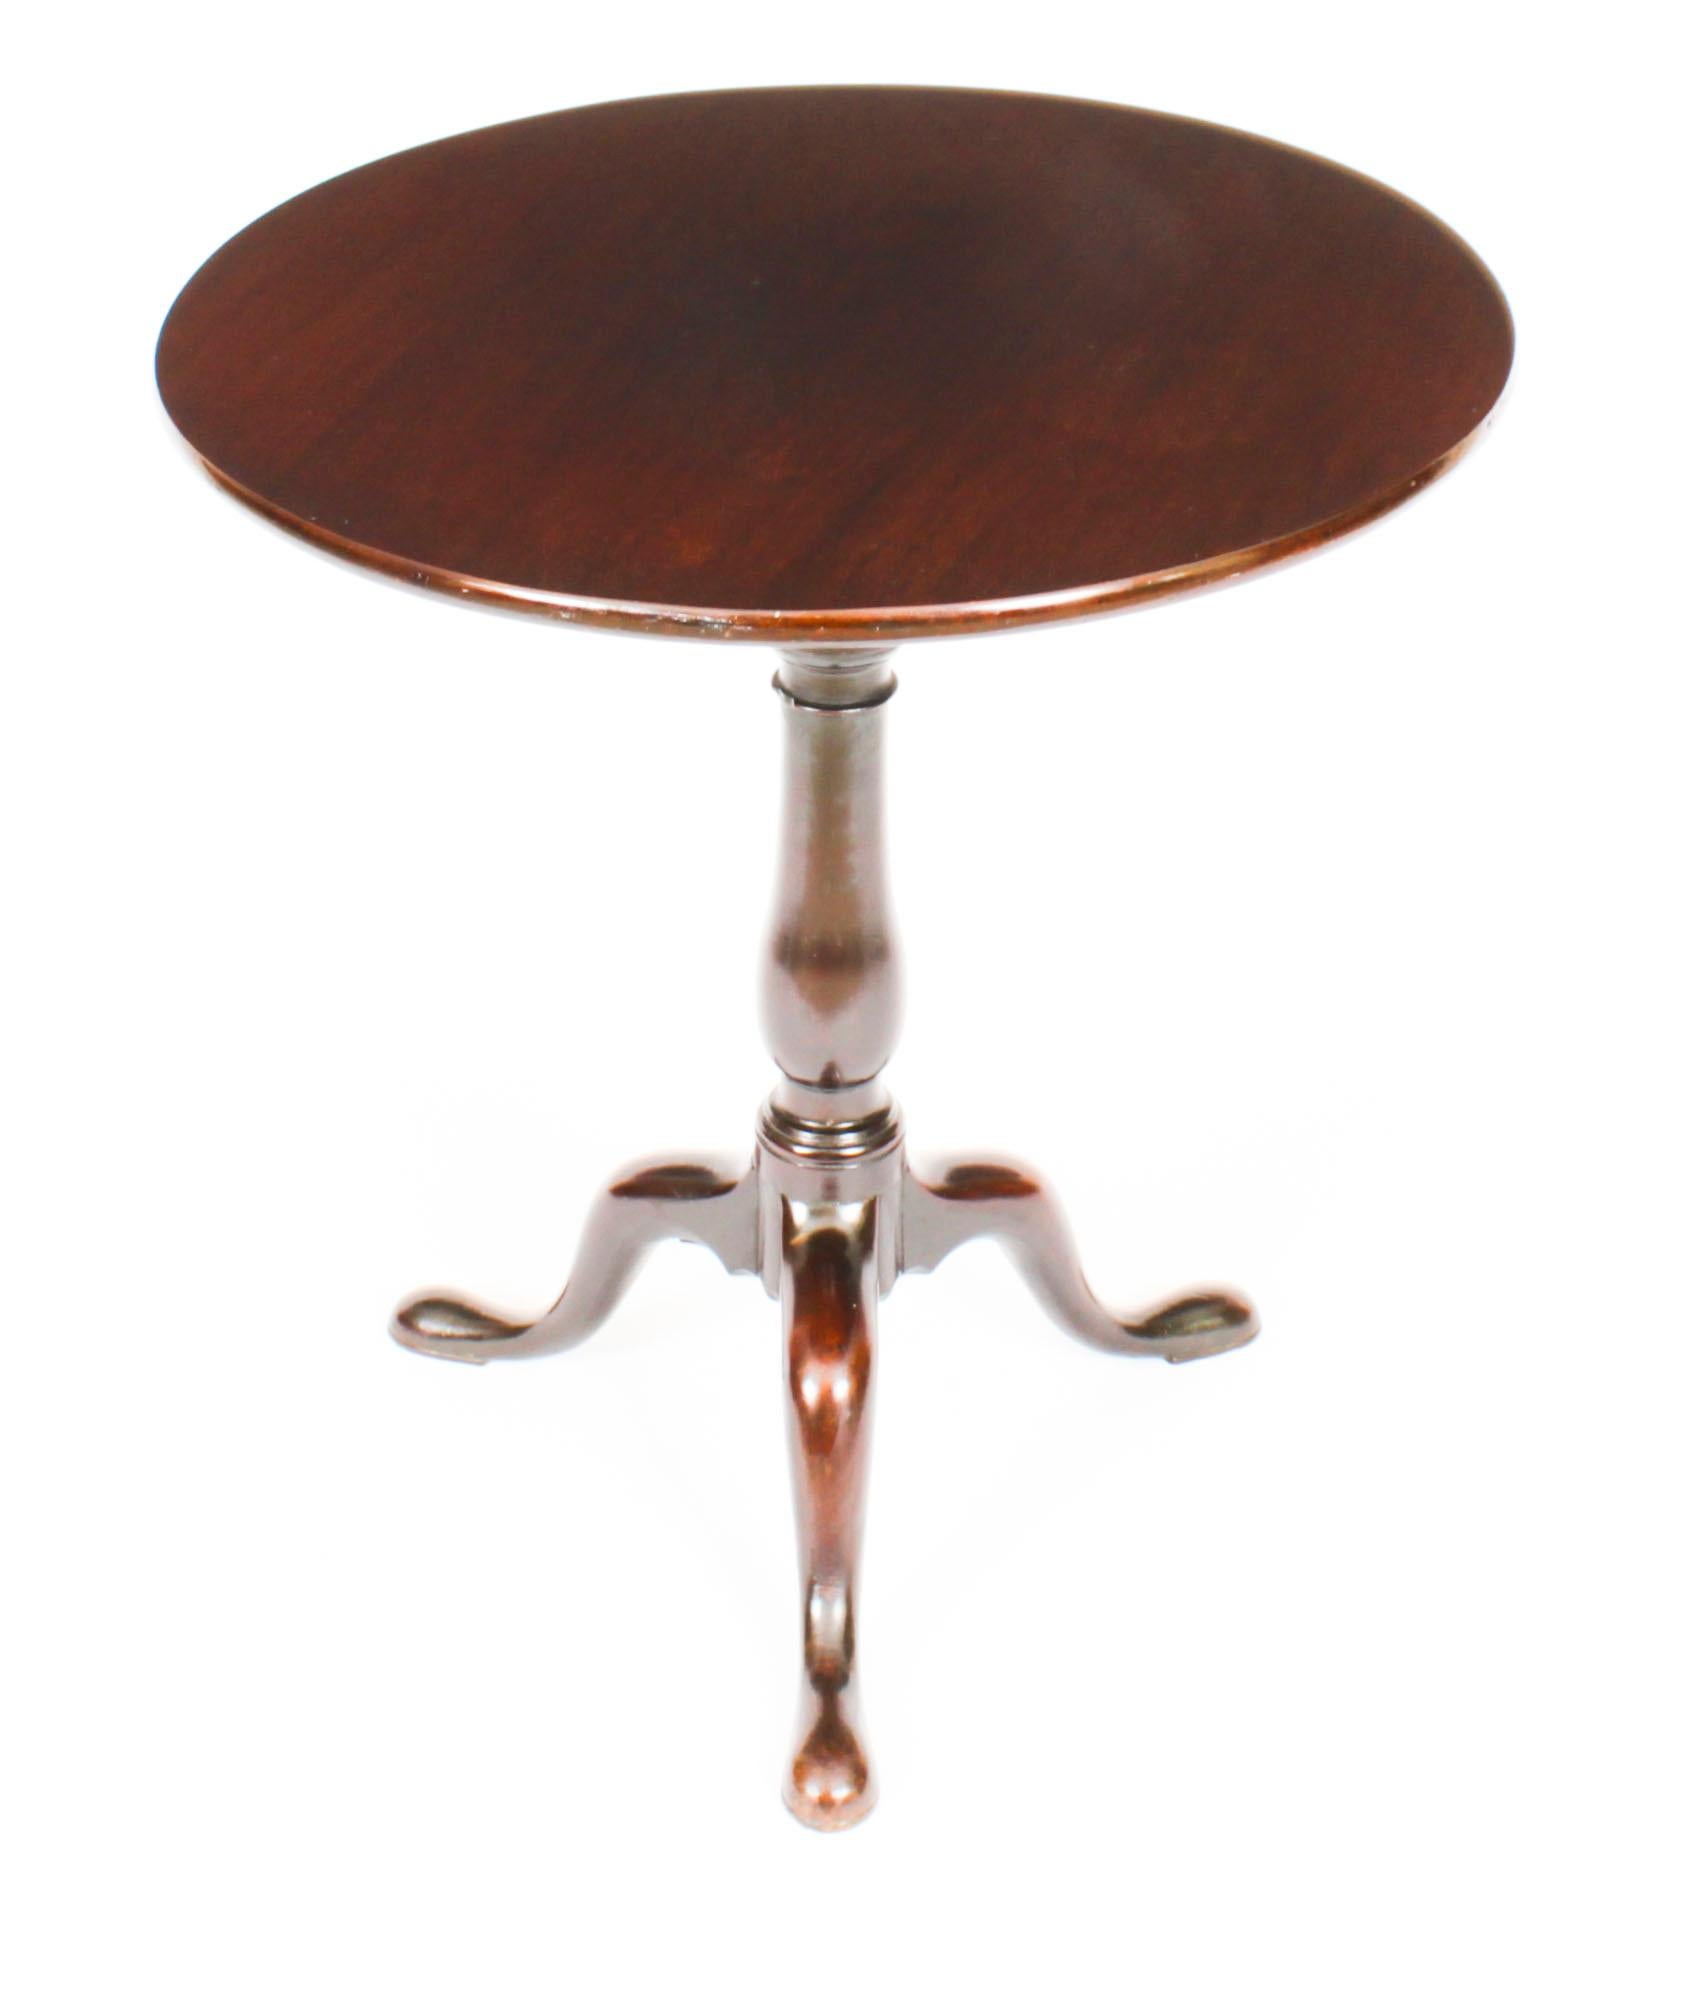 This is an elegantly proportioned antique Chippendale Period  occasional table circa 1765 in date.

This table has been masterfully crafted in  Cuban Mahogany with a birdcage circular tip top which allows it to revolve and tilt, raised on a finely